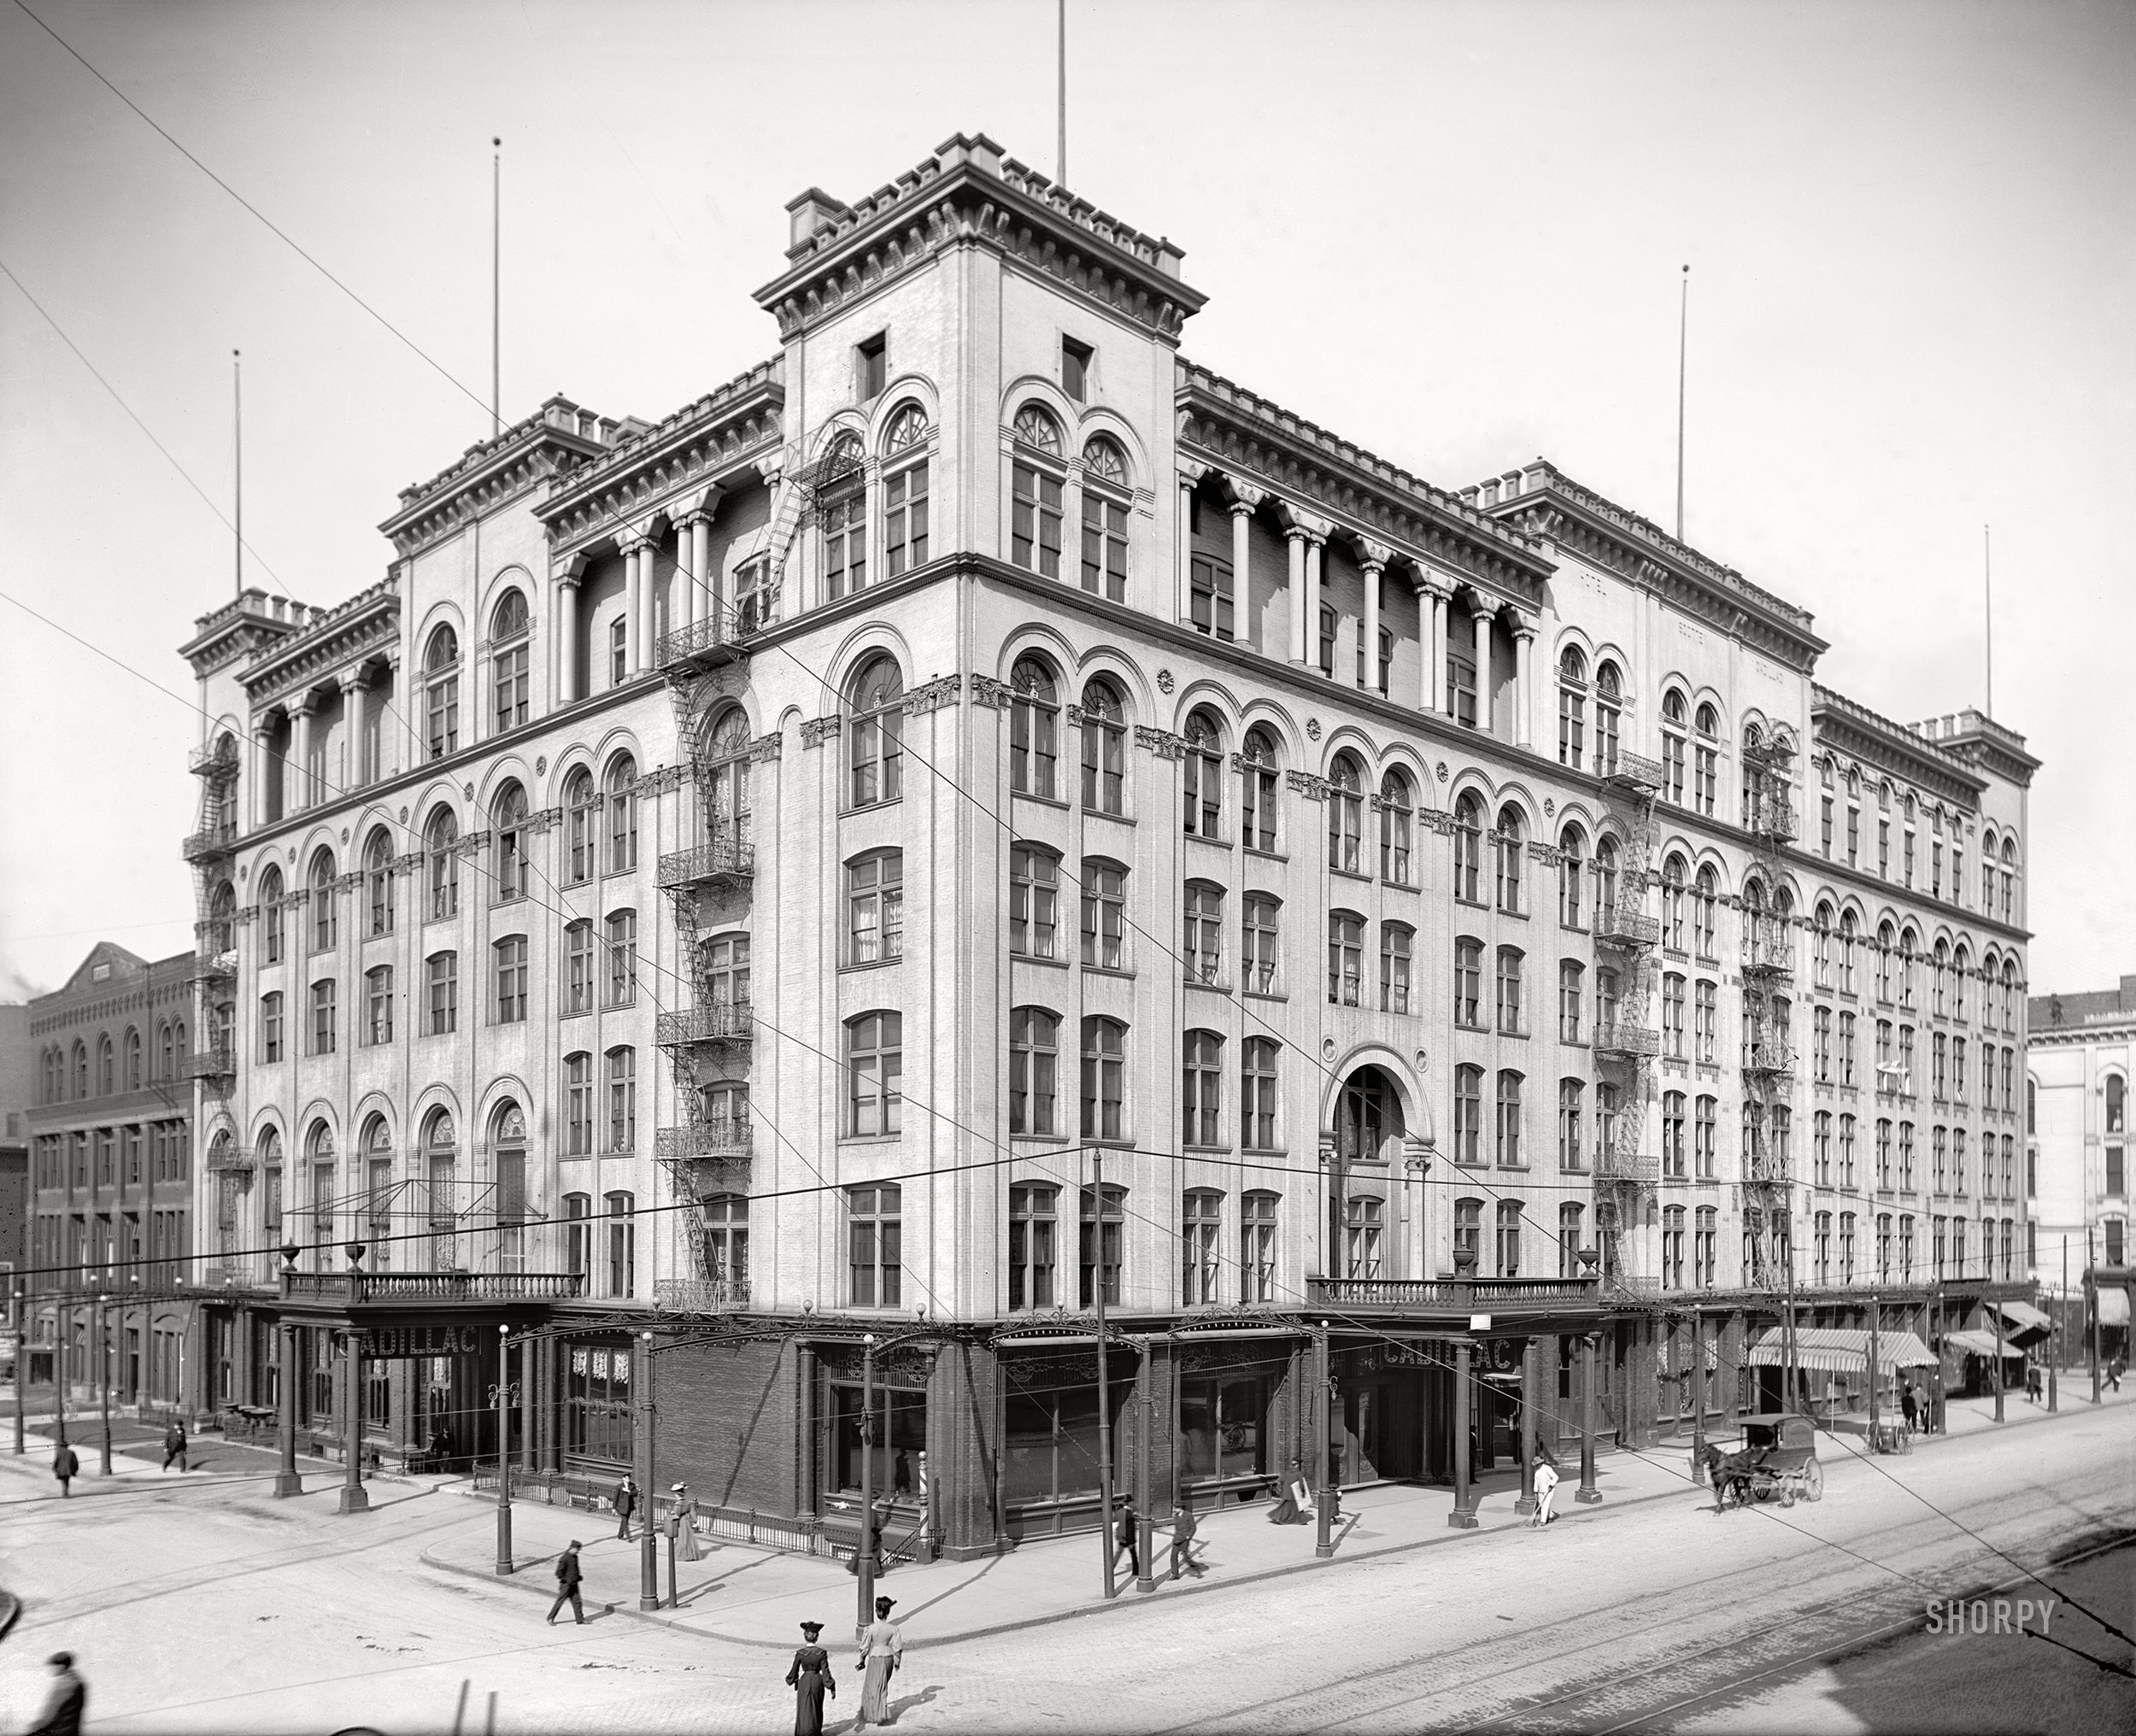 Detroit circa 1906. "Hotel Cadillac, Washington Boulevard." Last seen here, with a different cast of characters. 8x10 inch dry plate glass negative, Detroit Publishing Co. View full size.